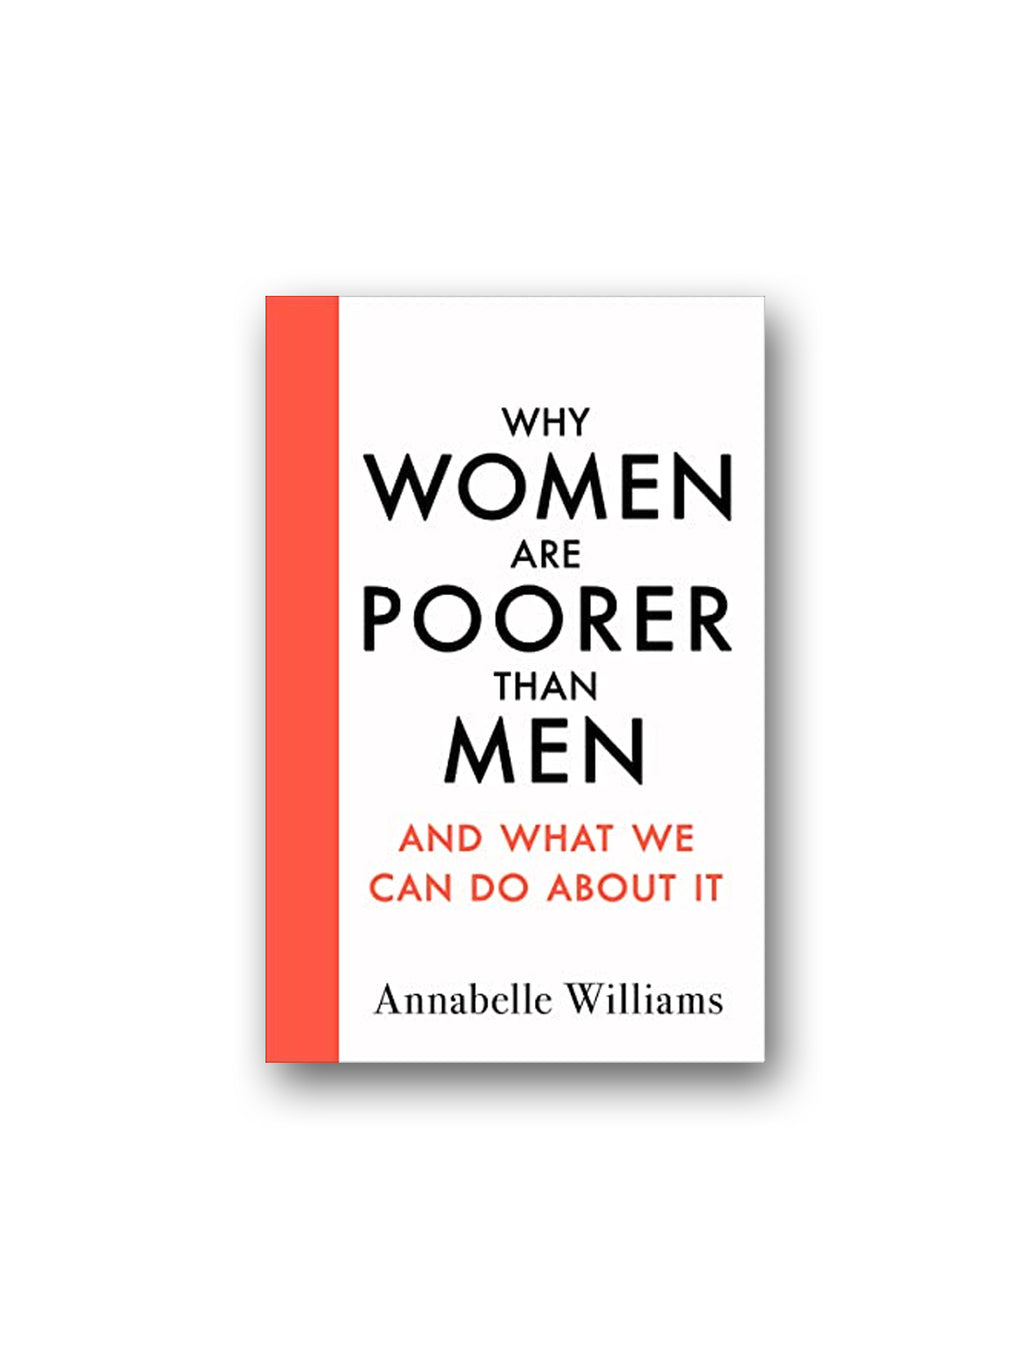 Why Women Are Poorer Than Men and What We Can Do About It